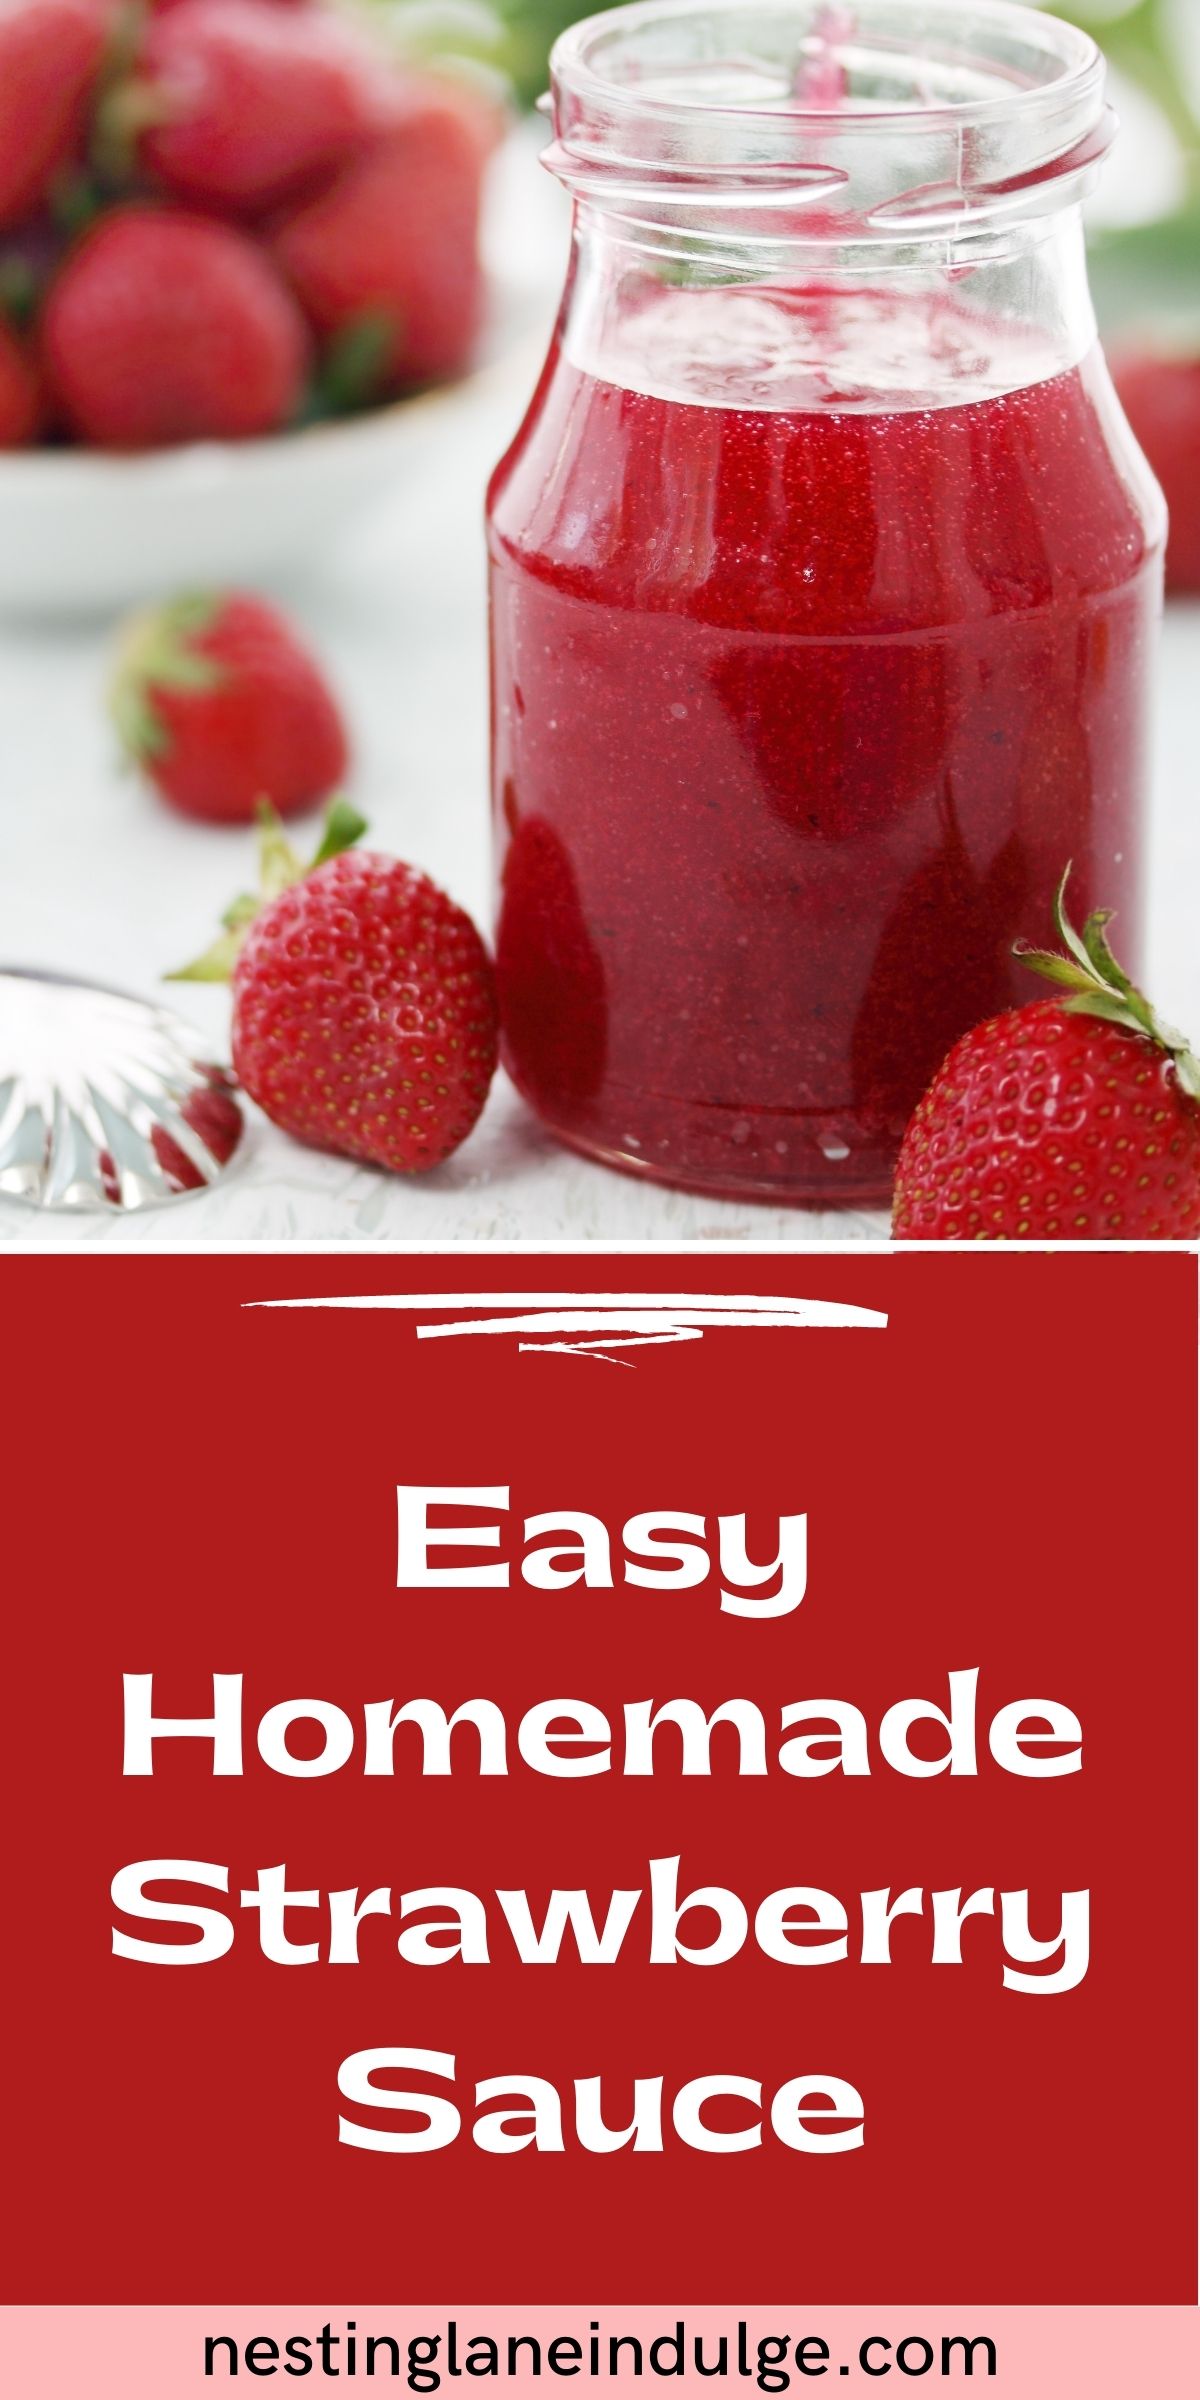 Graphic for Pinterest of Easy Homemade Strawberry Sauce Recipe.